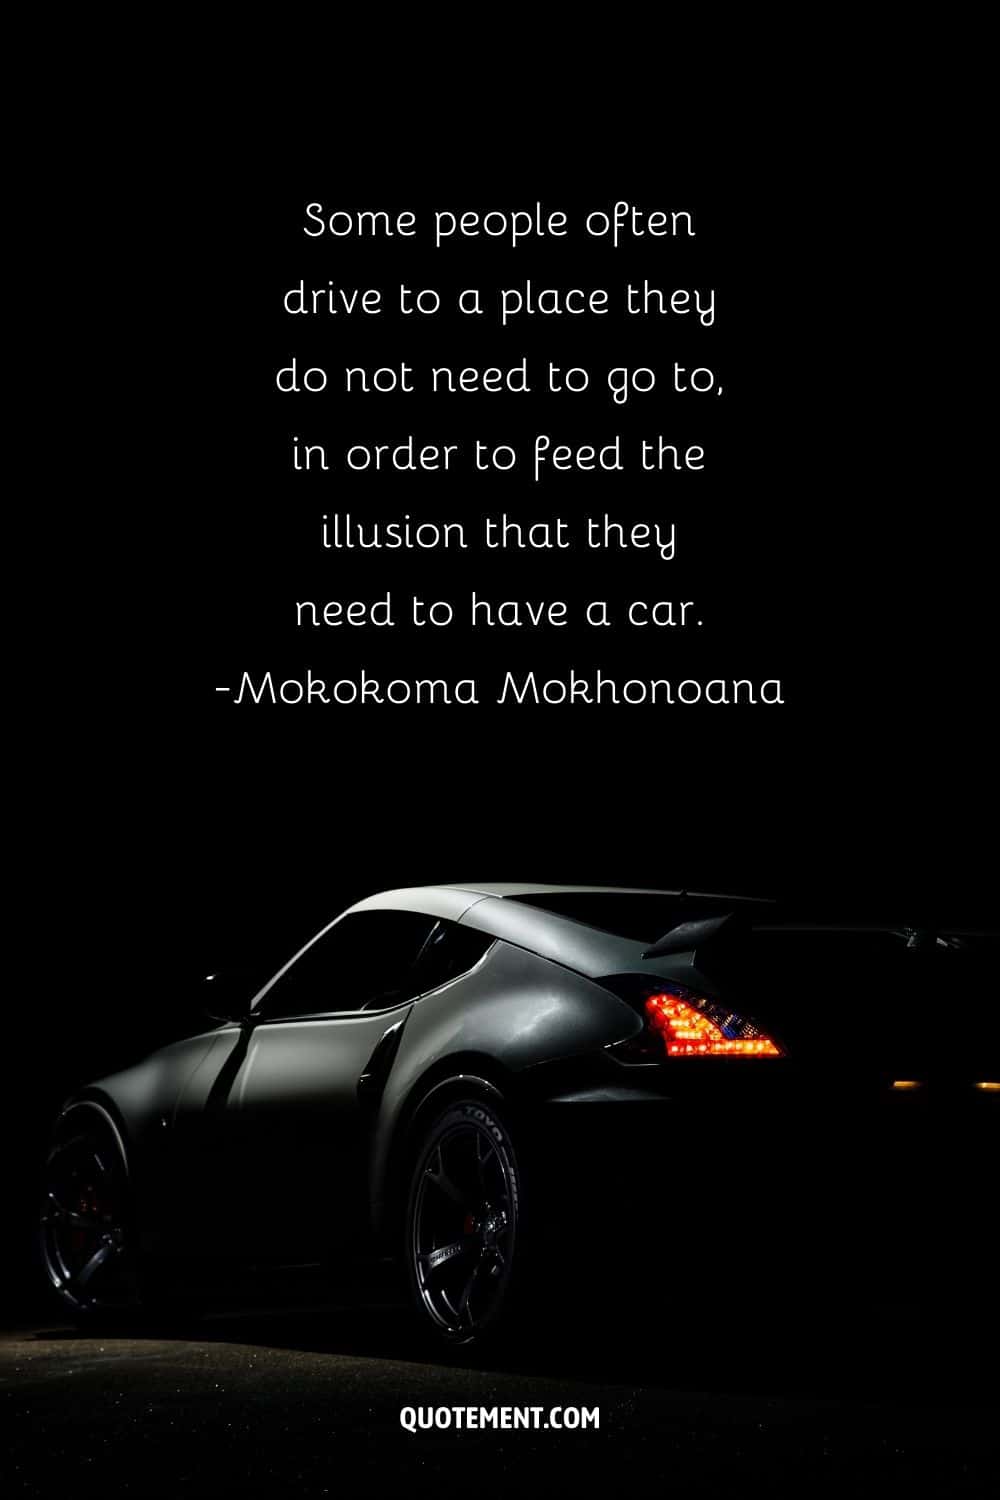 “Some people often drive to a place they do not need to go to, in order to feed the illusion that they need to have a car.” ― Mokokoma Mokhonoana